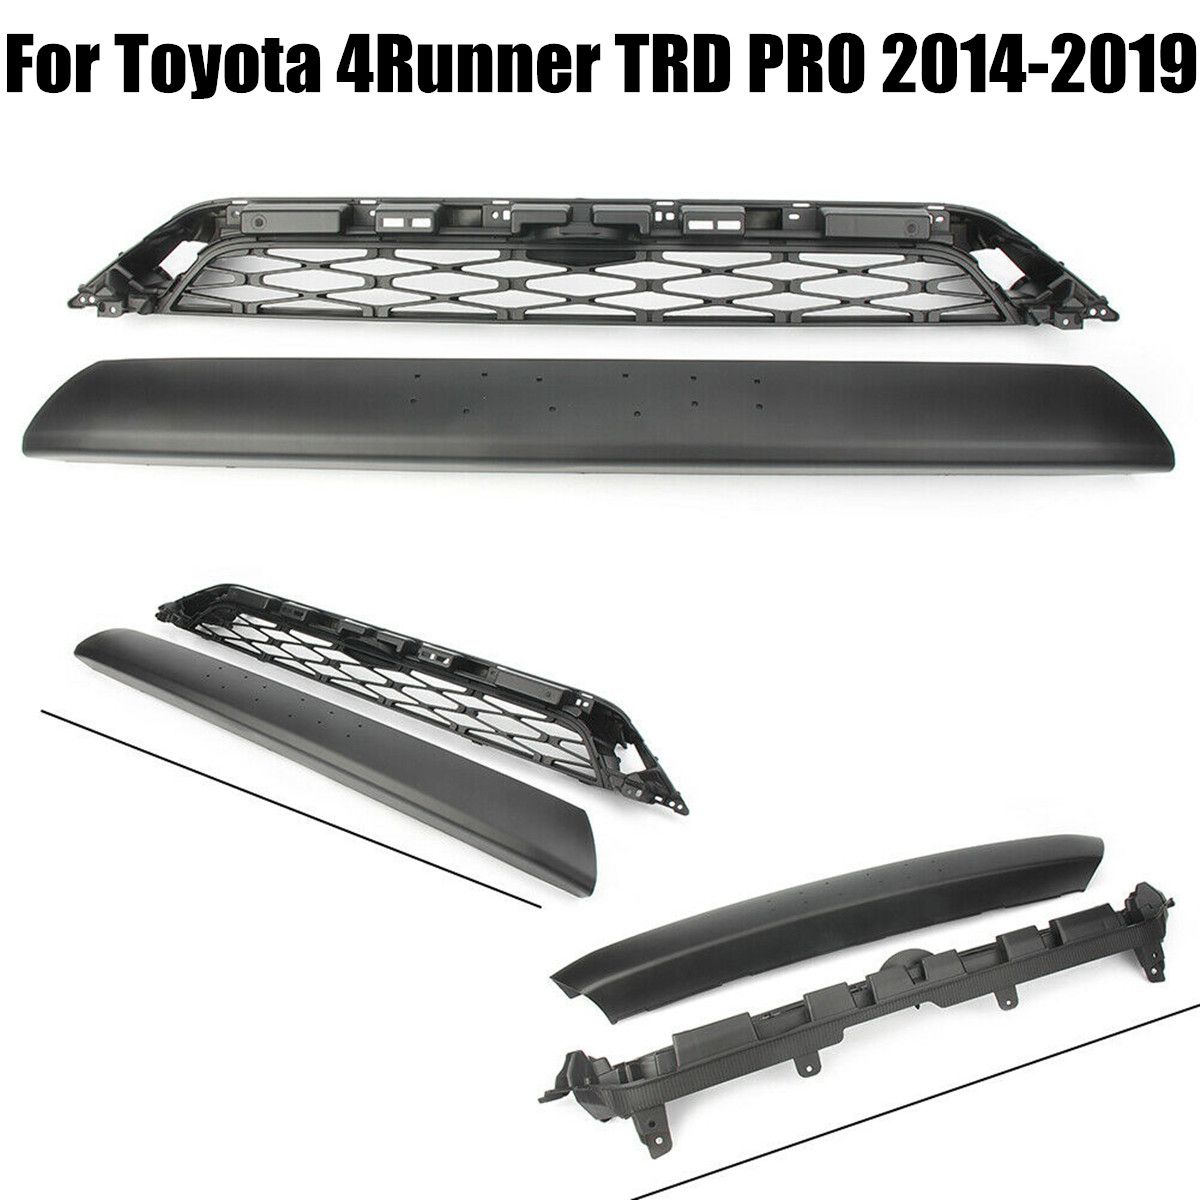 2pcs-Front-Grille-Mesh-Grill-Set-For-Toyota-4Runner-TRD-PRO-2014-2018-1690240